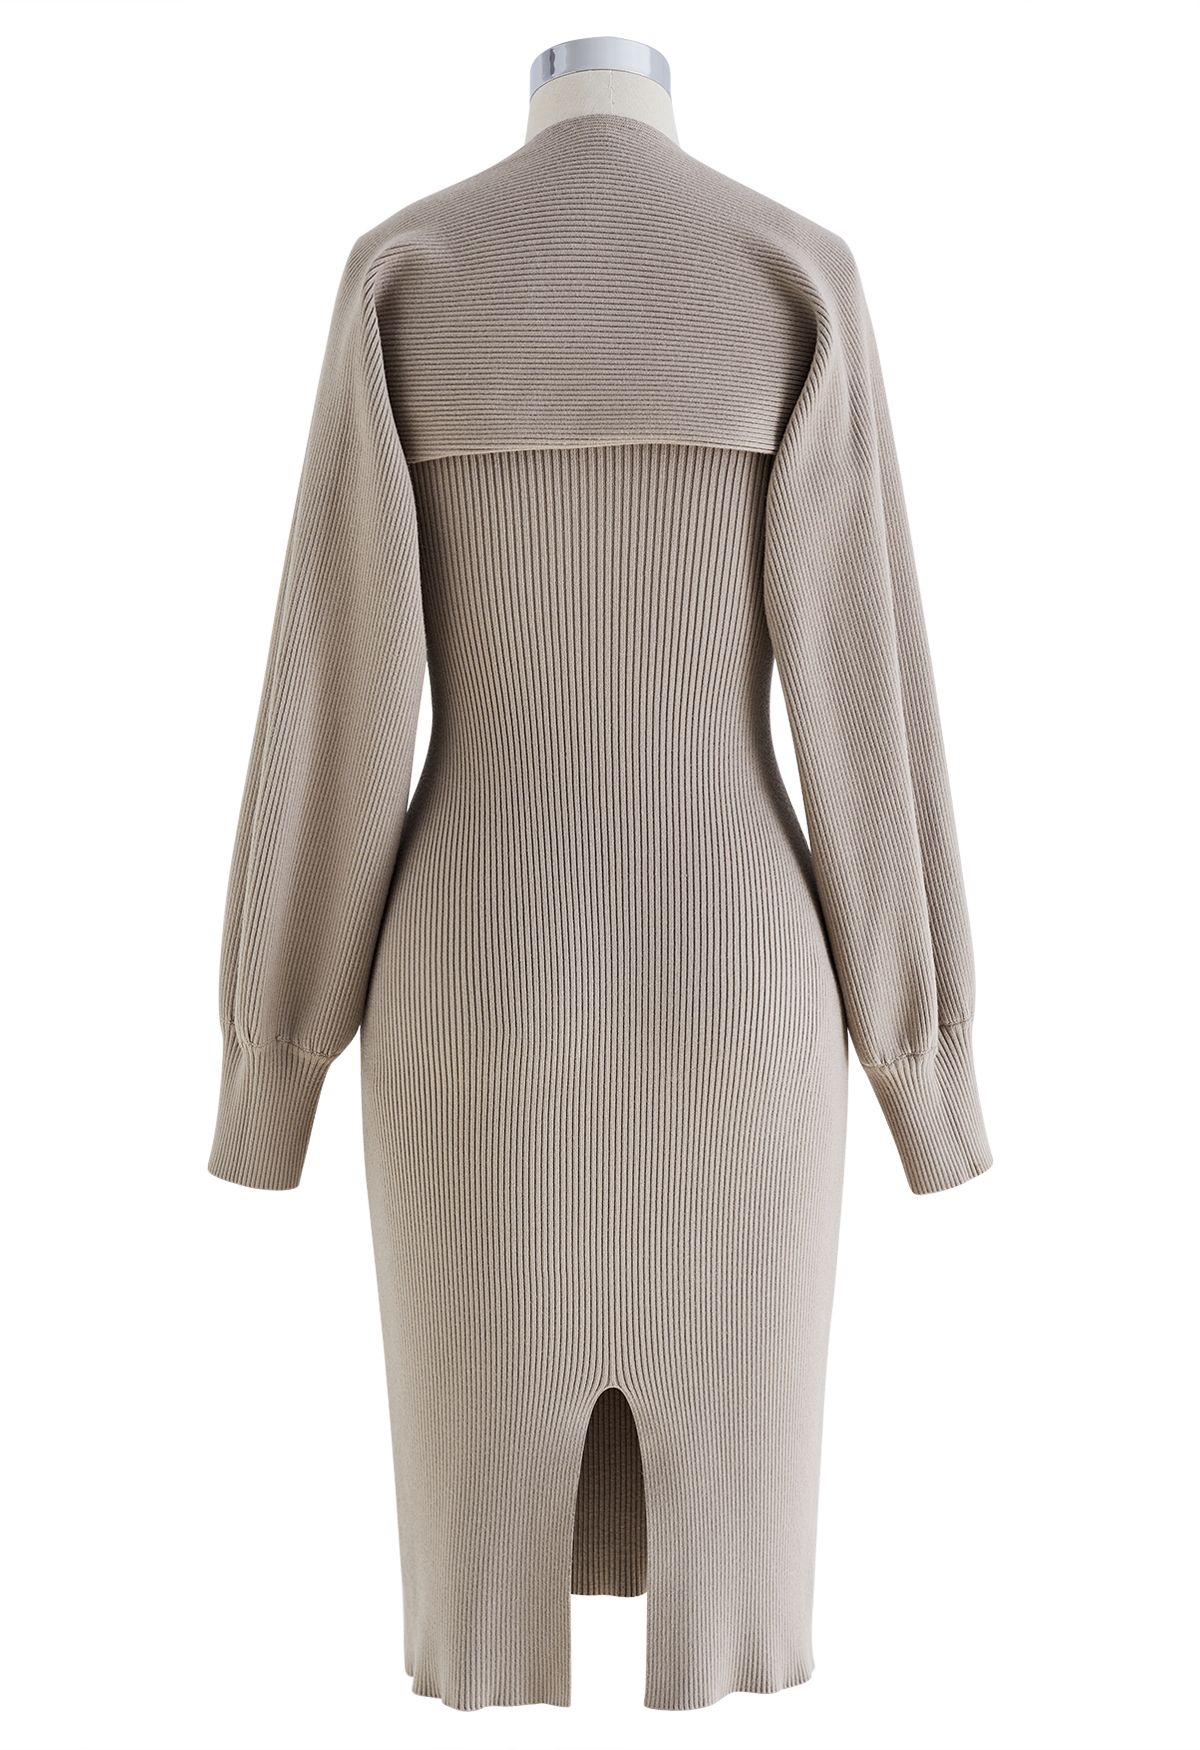 Feathered Ribbed Knit Twinset Dress in Taupe